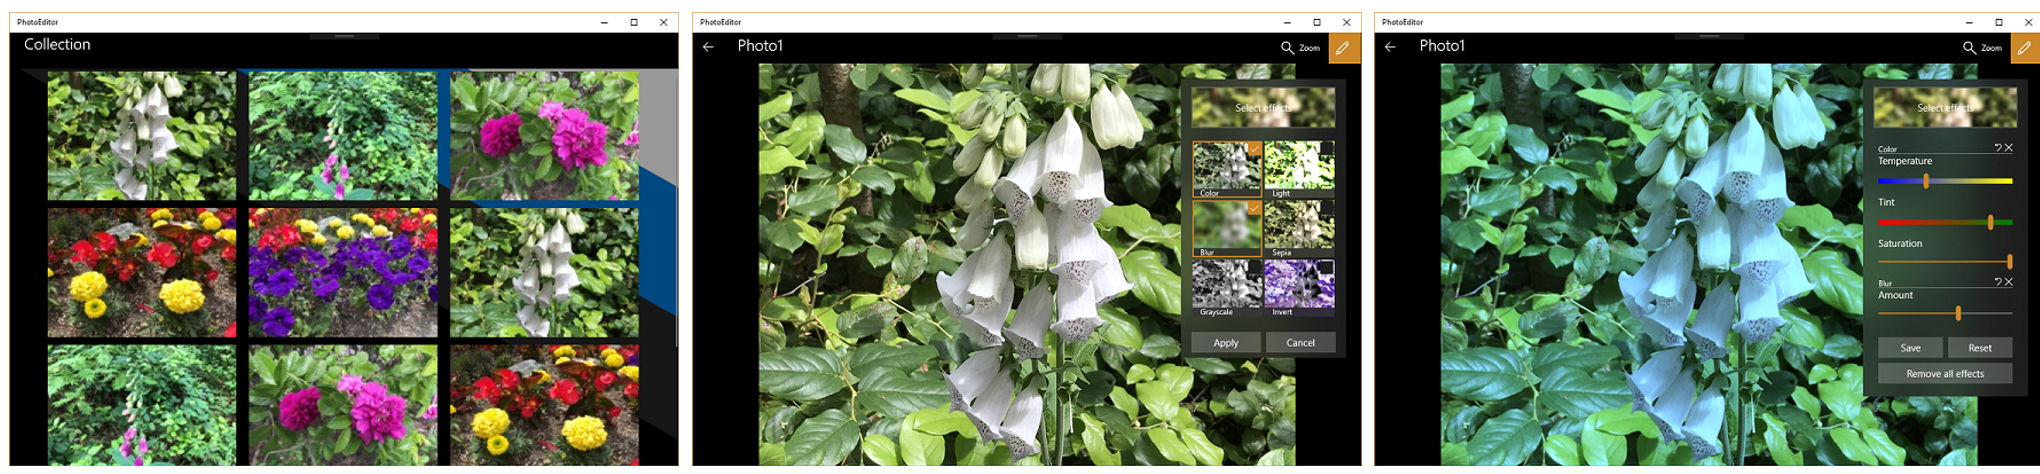 PhotoEditor sample showing the image collection page, editing page, and editing controls